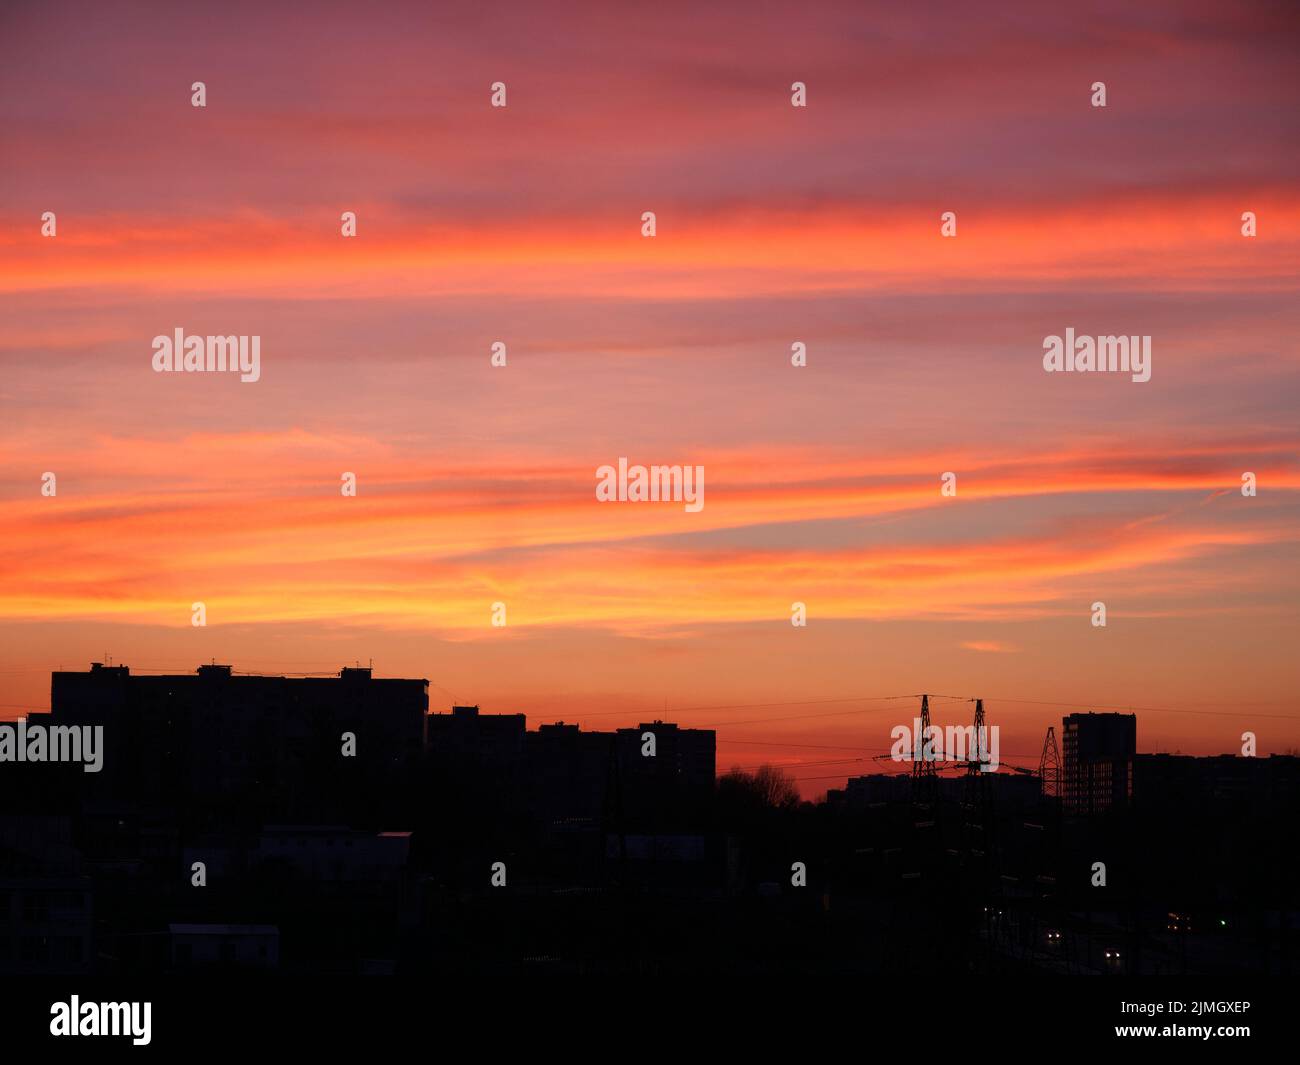 Bright sunset sky over the silhouette of the evening city. Beautiful bright sunset sky over building silhouettes Stock Photo